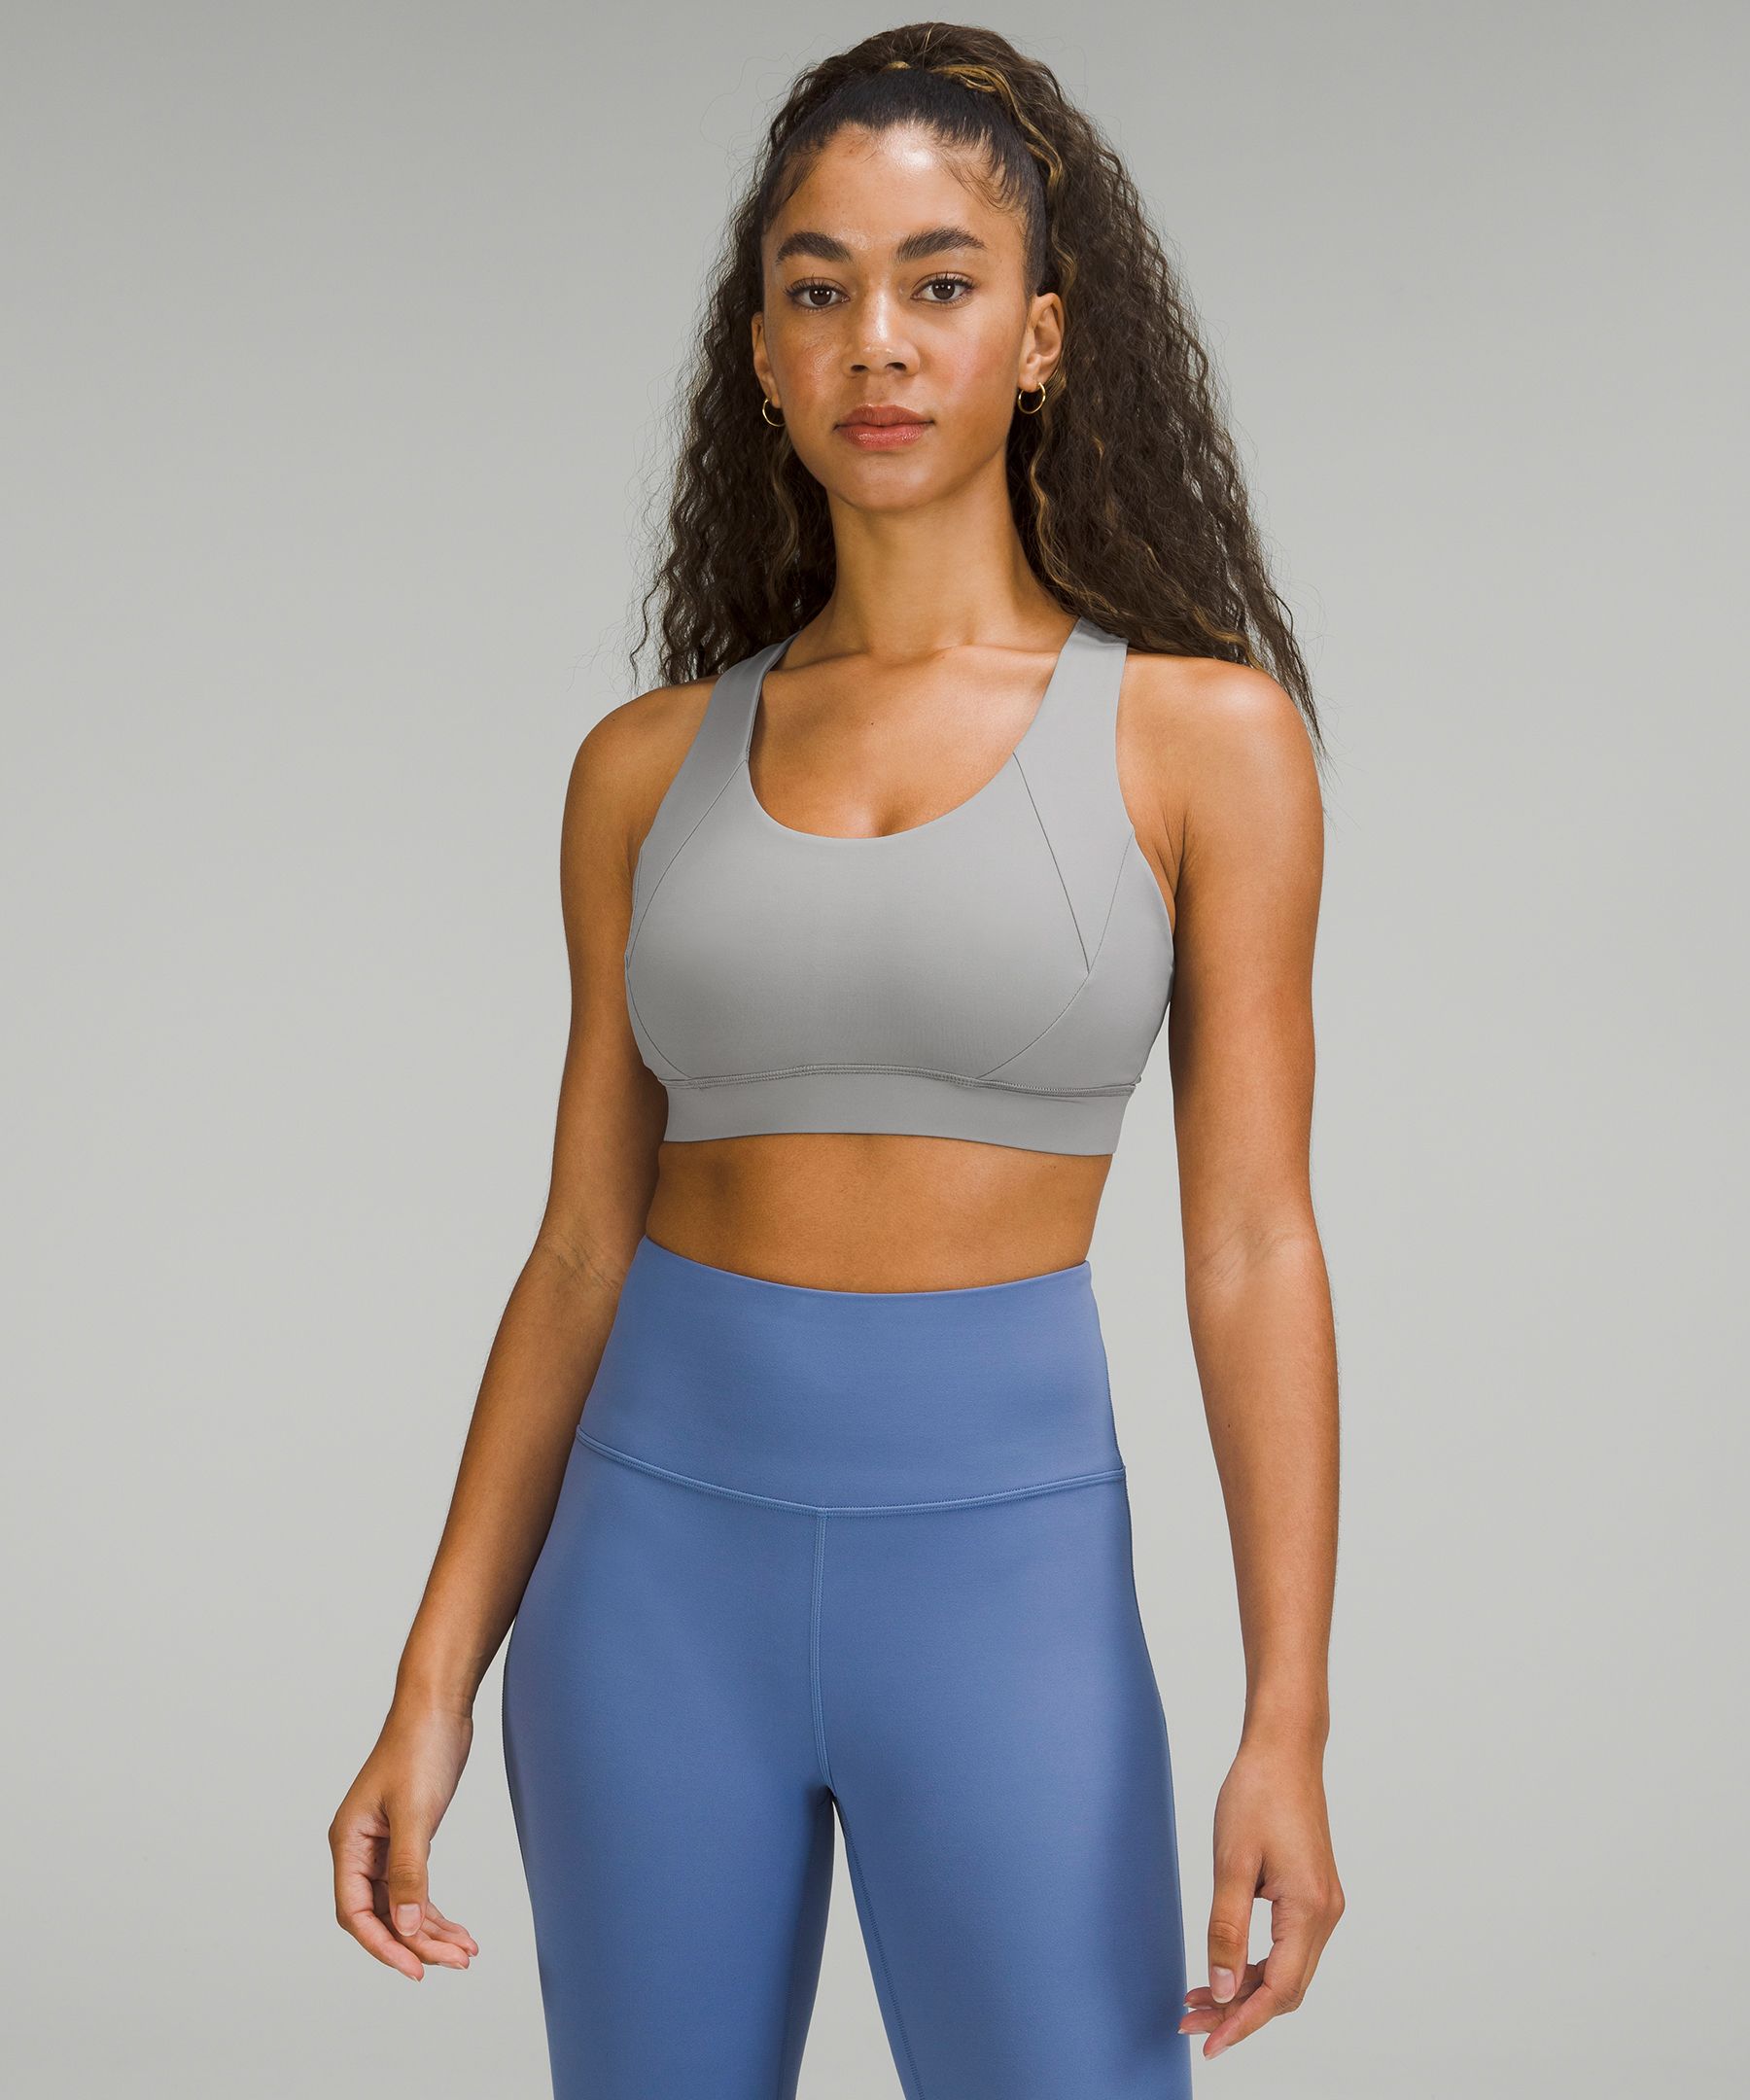 Lululemon Free To Be Elevated Bra Light Support, Dd/ddd(e) Cup In Gull Grey